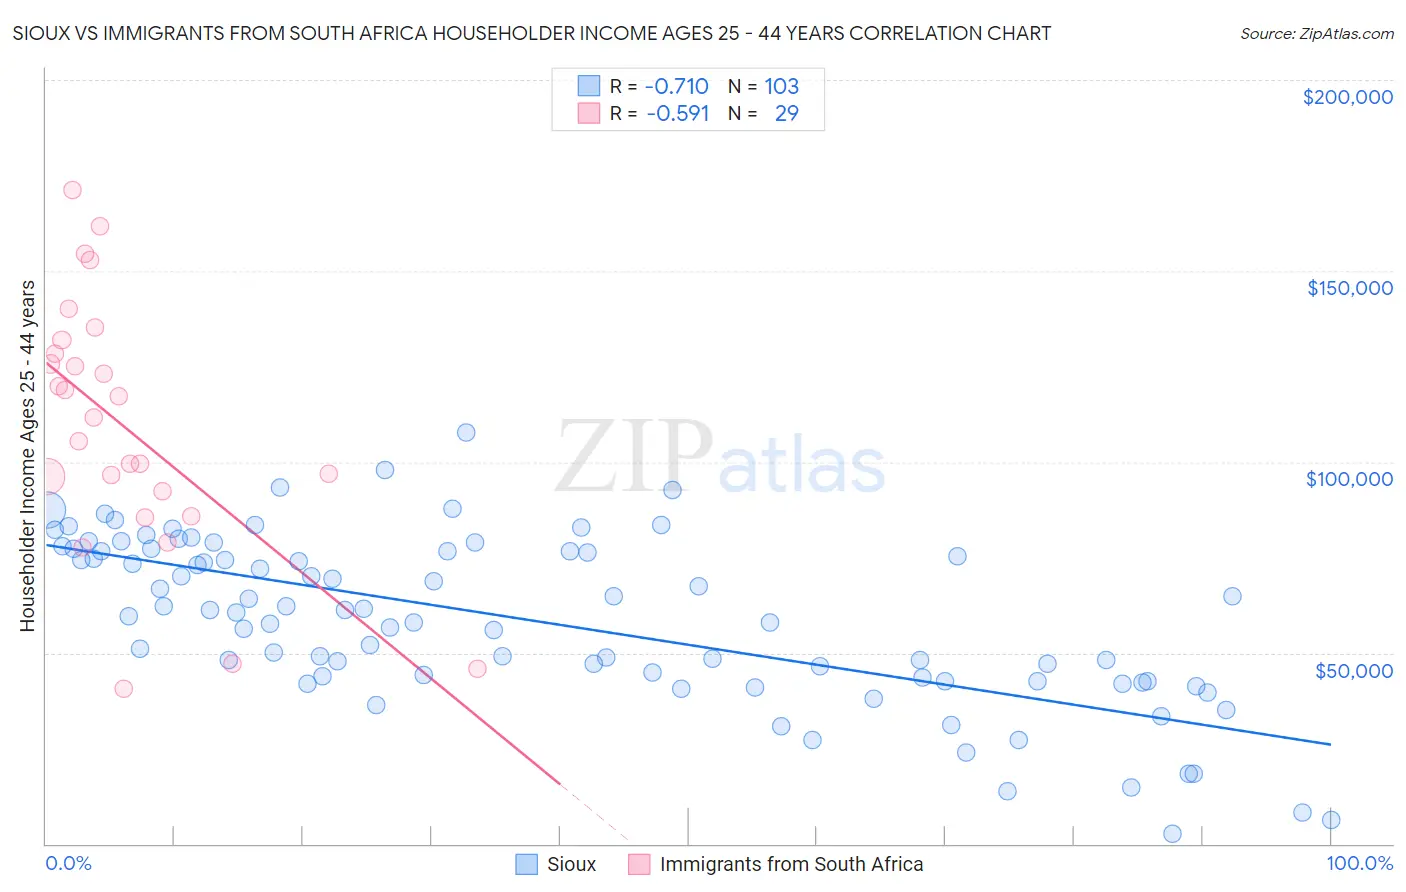 Sioux vs Immigrants from South Africa Householder Income Ages 25 - 44 years